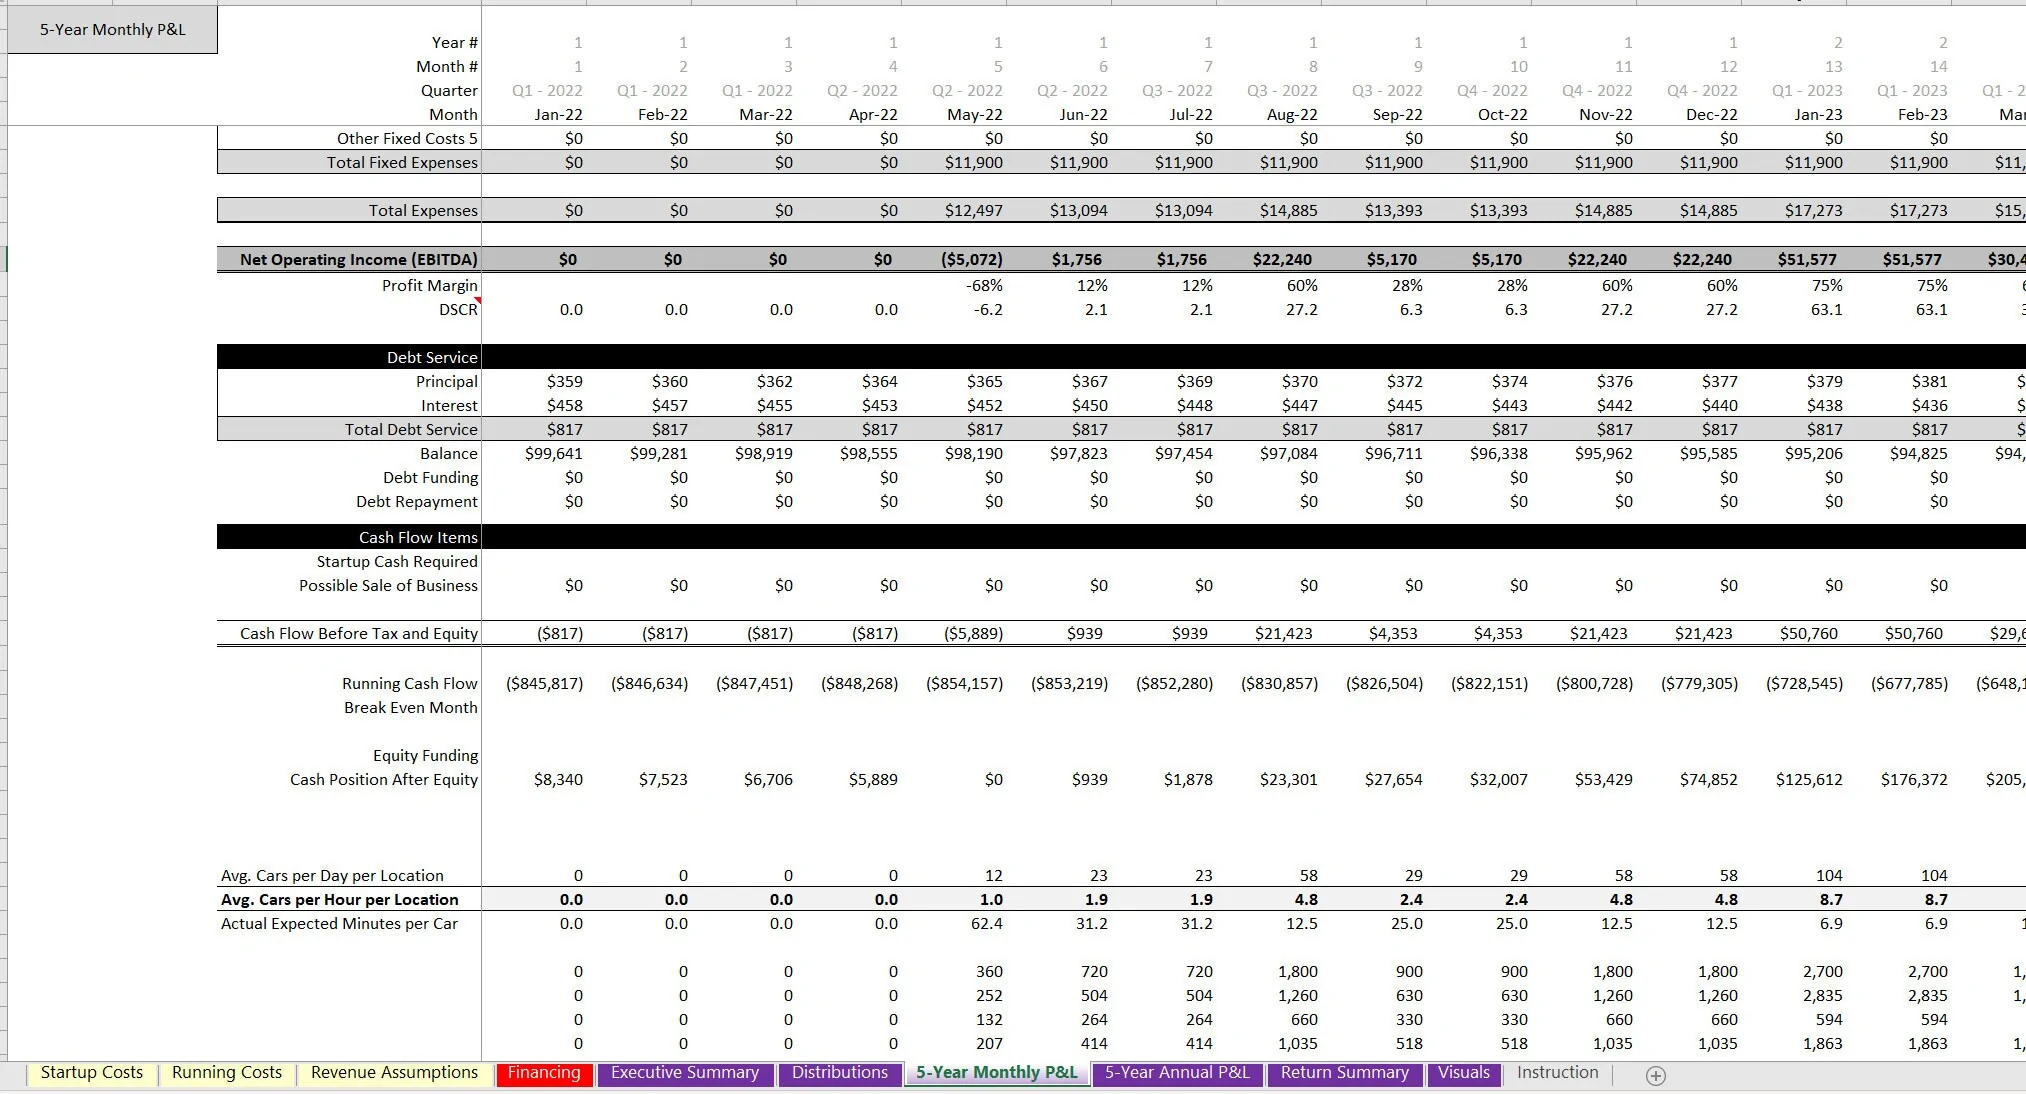 Car Wash Financial Model: 5 Years and Seasonality Logic (Excel template (XLSX)) Preview Image